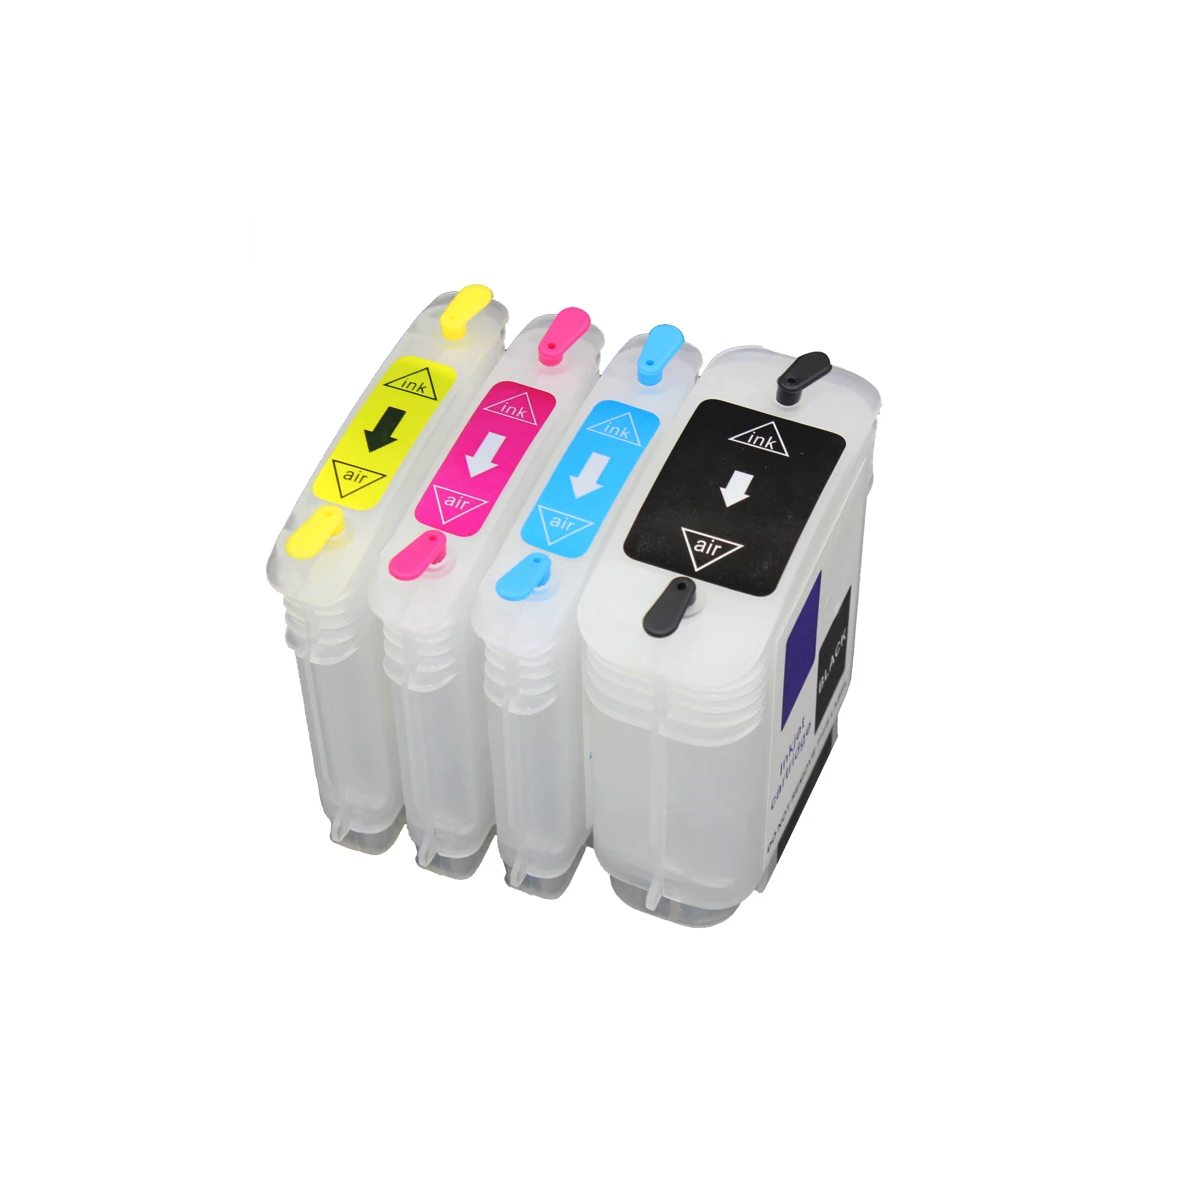 Cartouches rechargeables compatibles HP 10/11